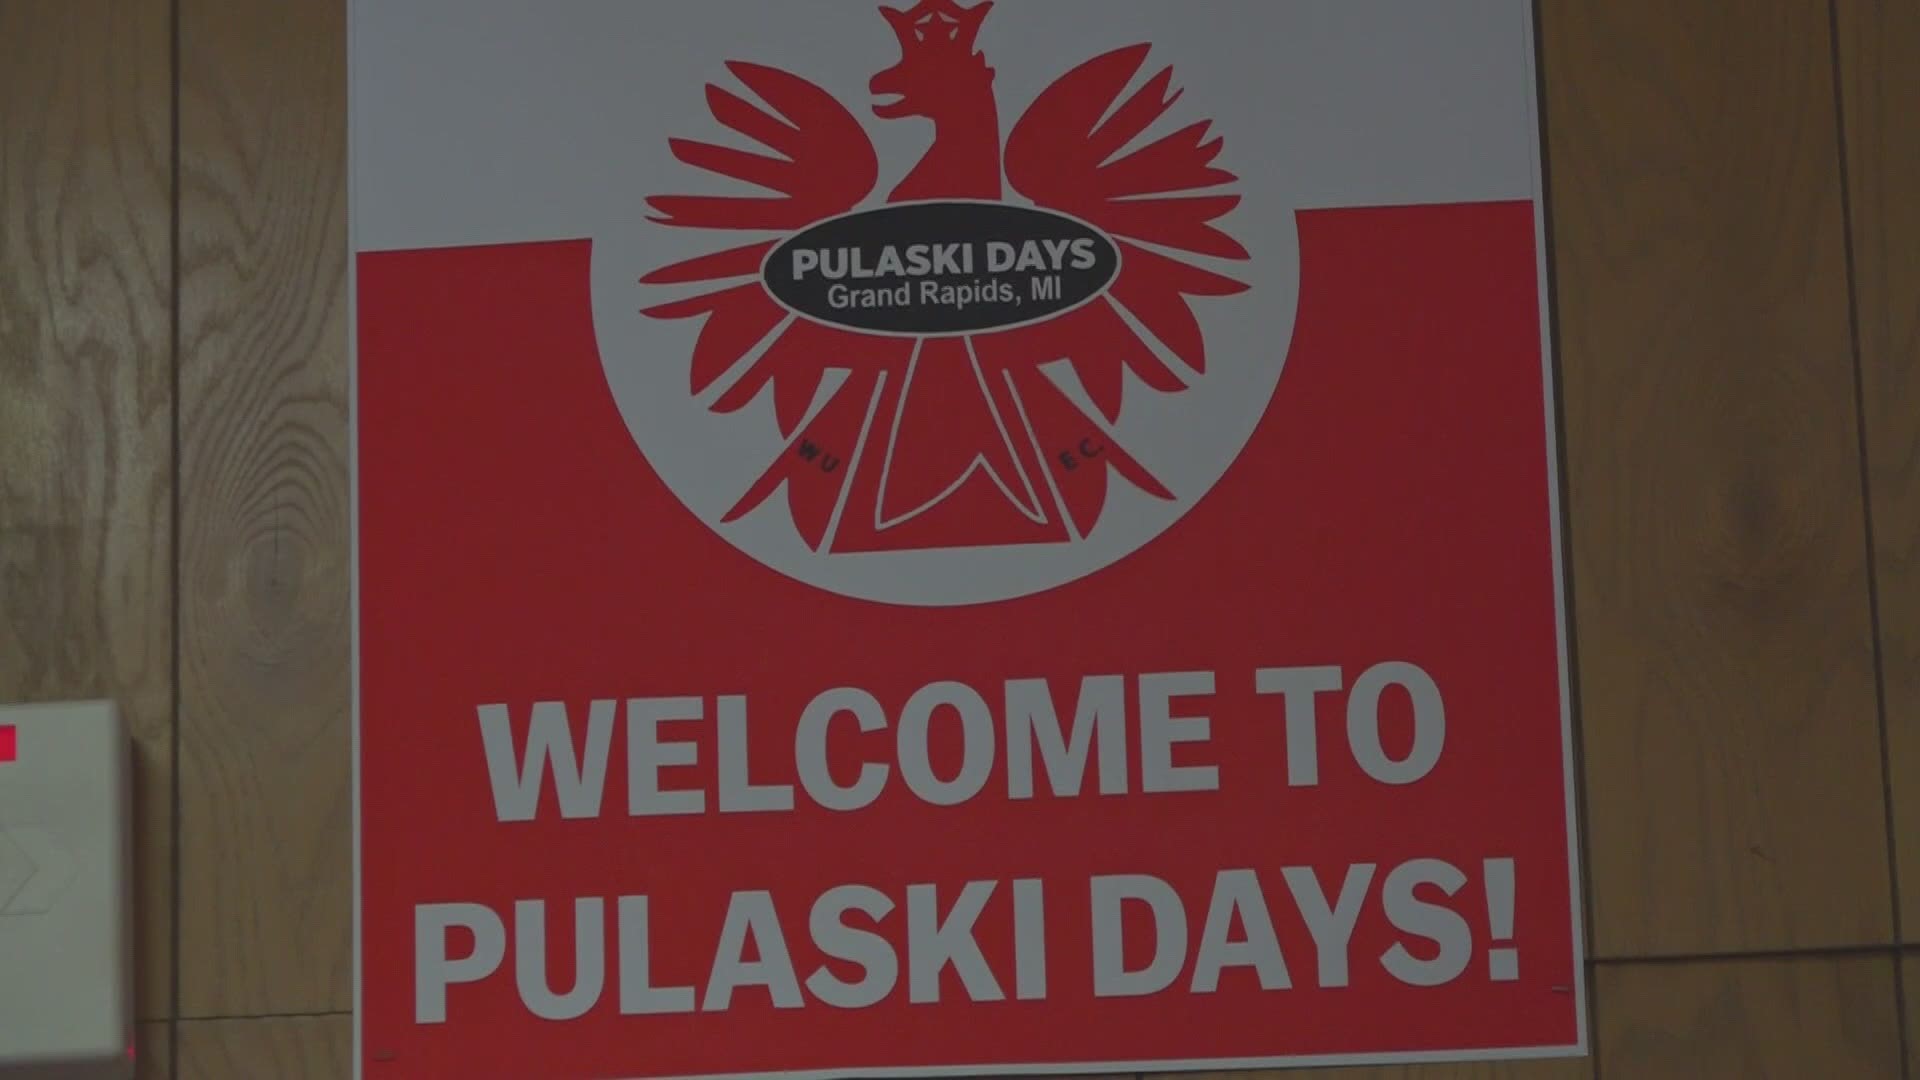 The committee is launching the "Save the Halls" campaign to raise money to help the organizations make it through to Pulaski Days 2021